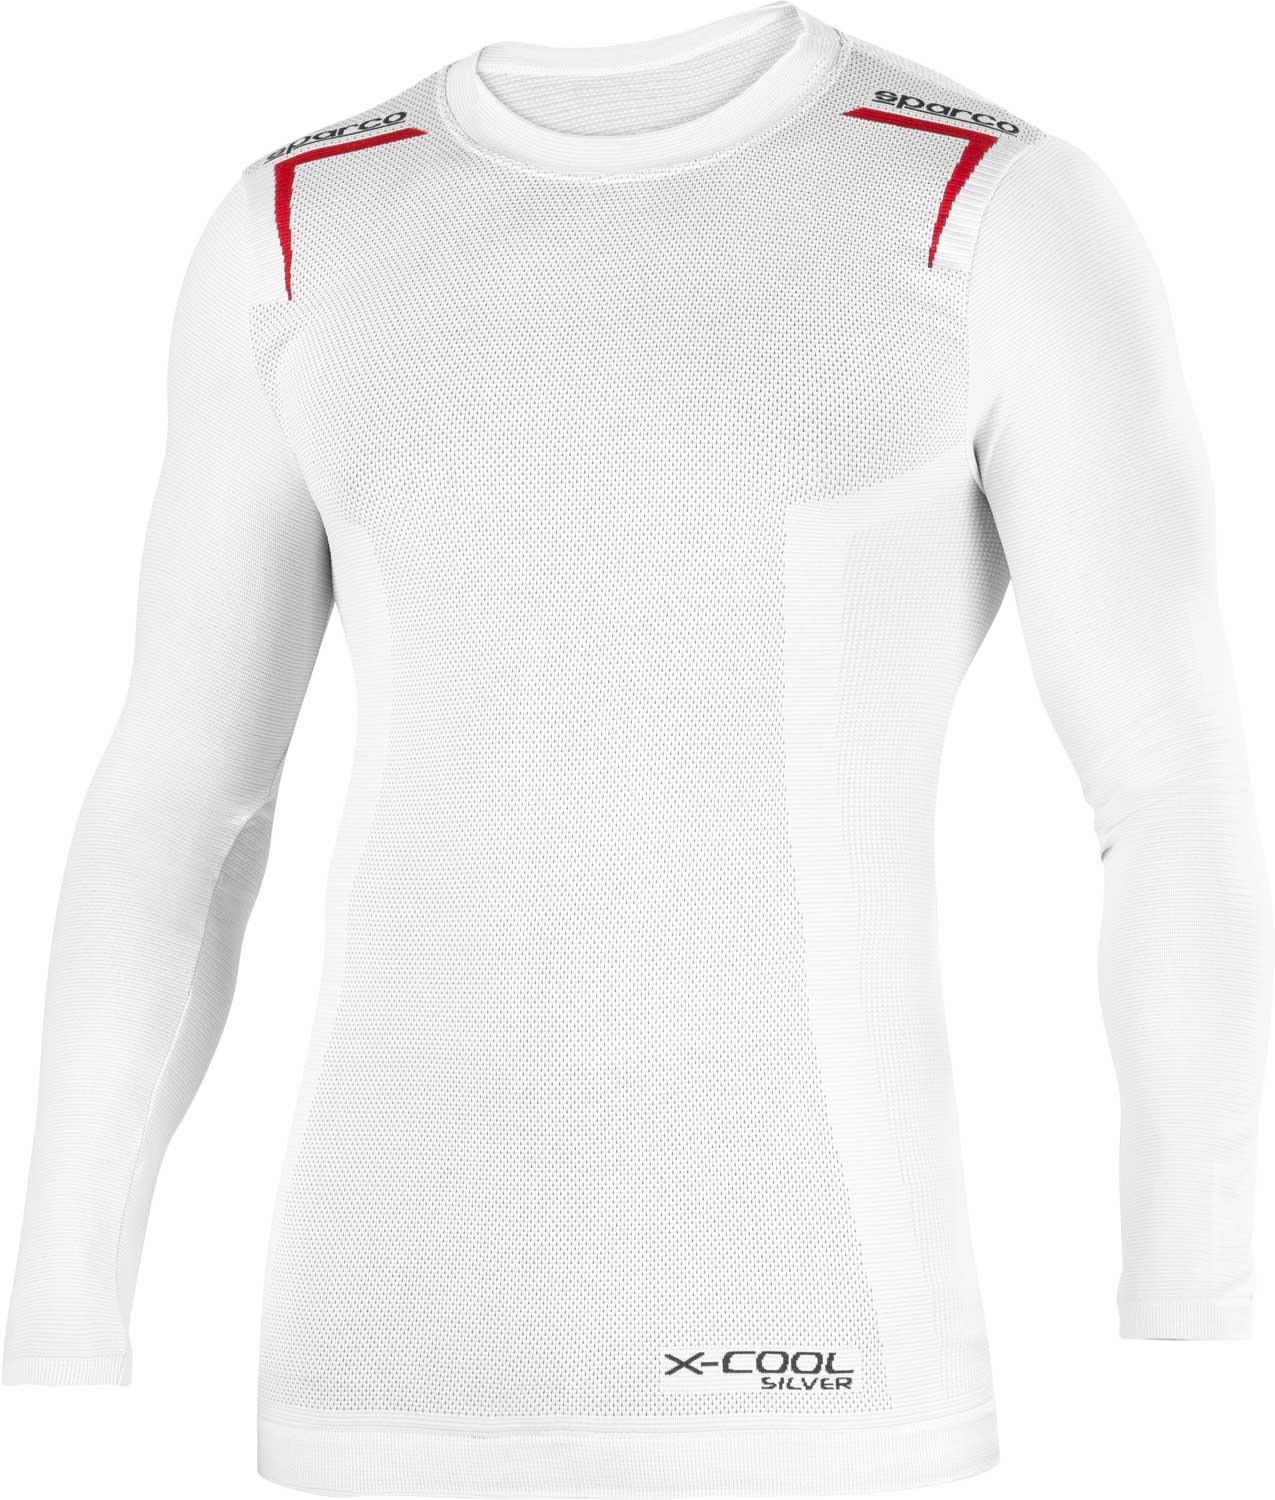 Sparco Pullover K-Carbon